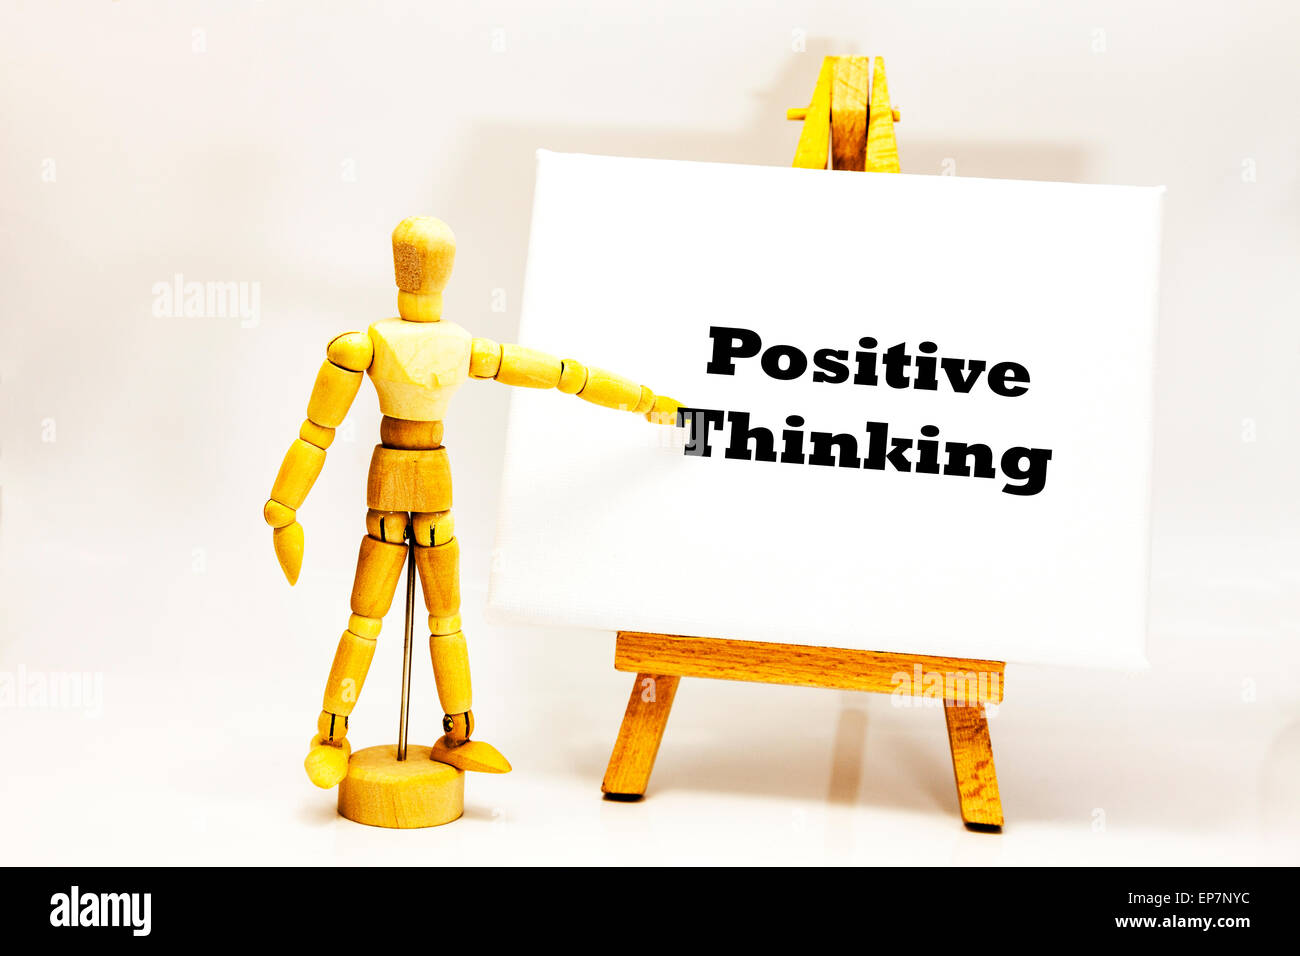 Wooden man with white board pointing at words 'Positive Thinking' using mind to control patterns affirmations attitude outlook Stock Photo